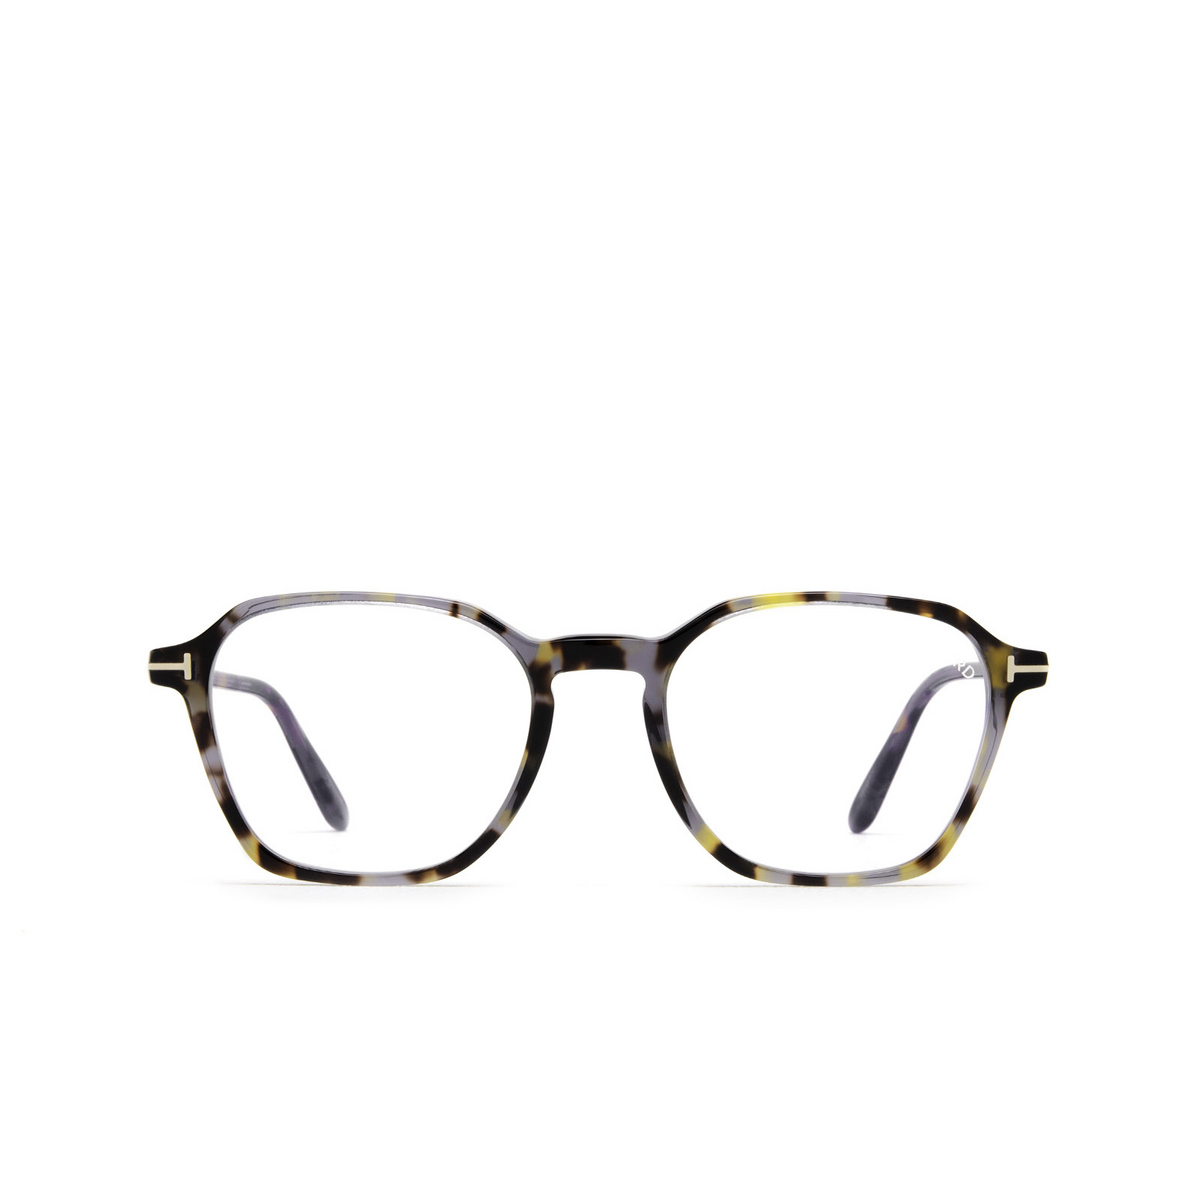 Tom Ford® Square Eyeglasses: FT5804-B color Colored Havana 055 - front view.